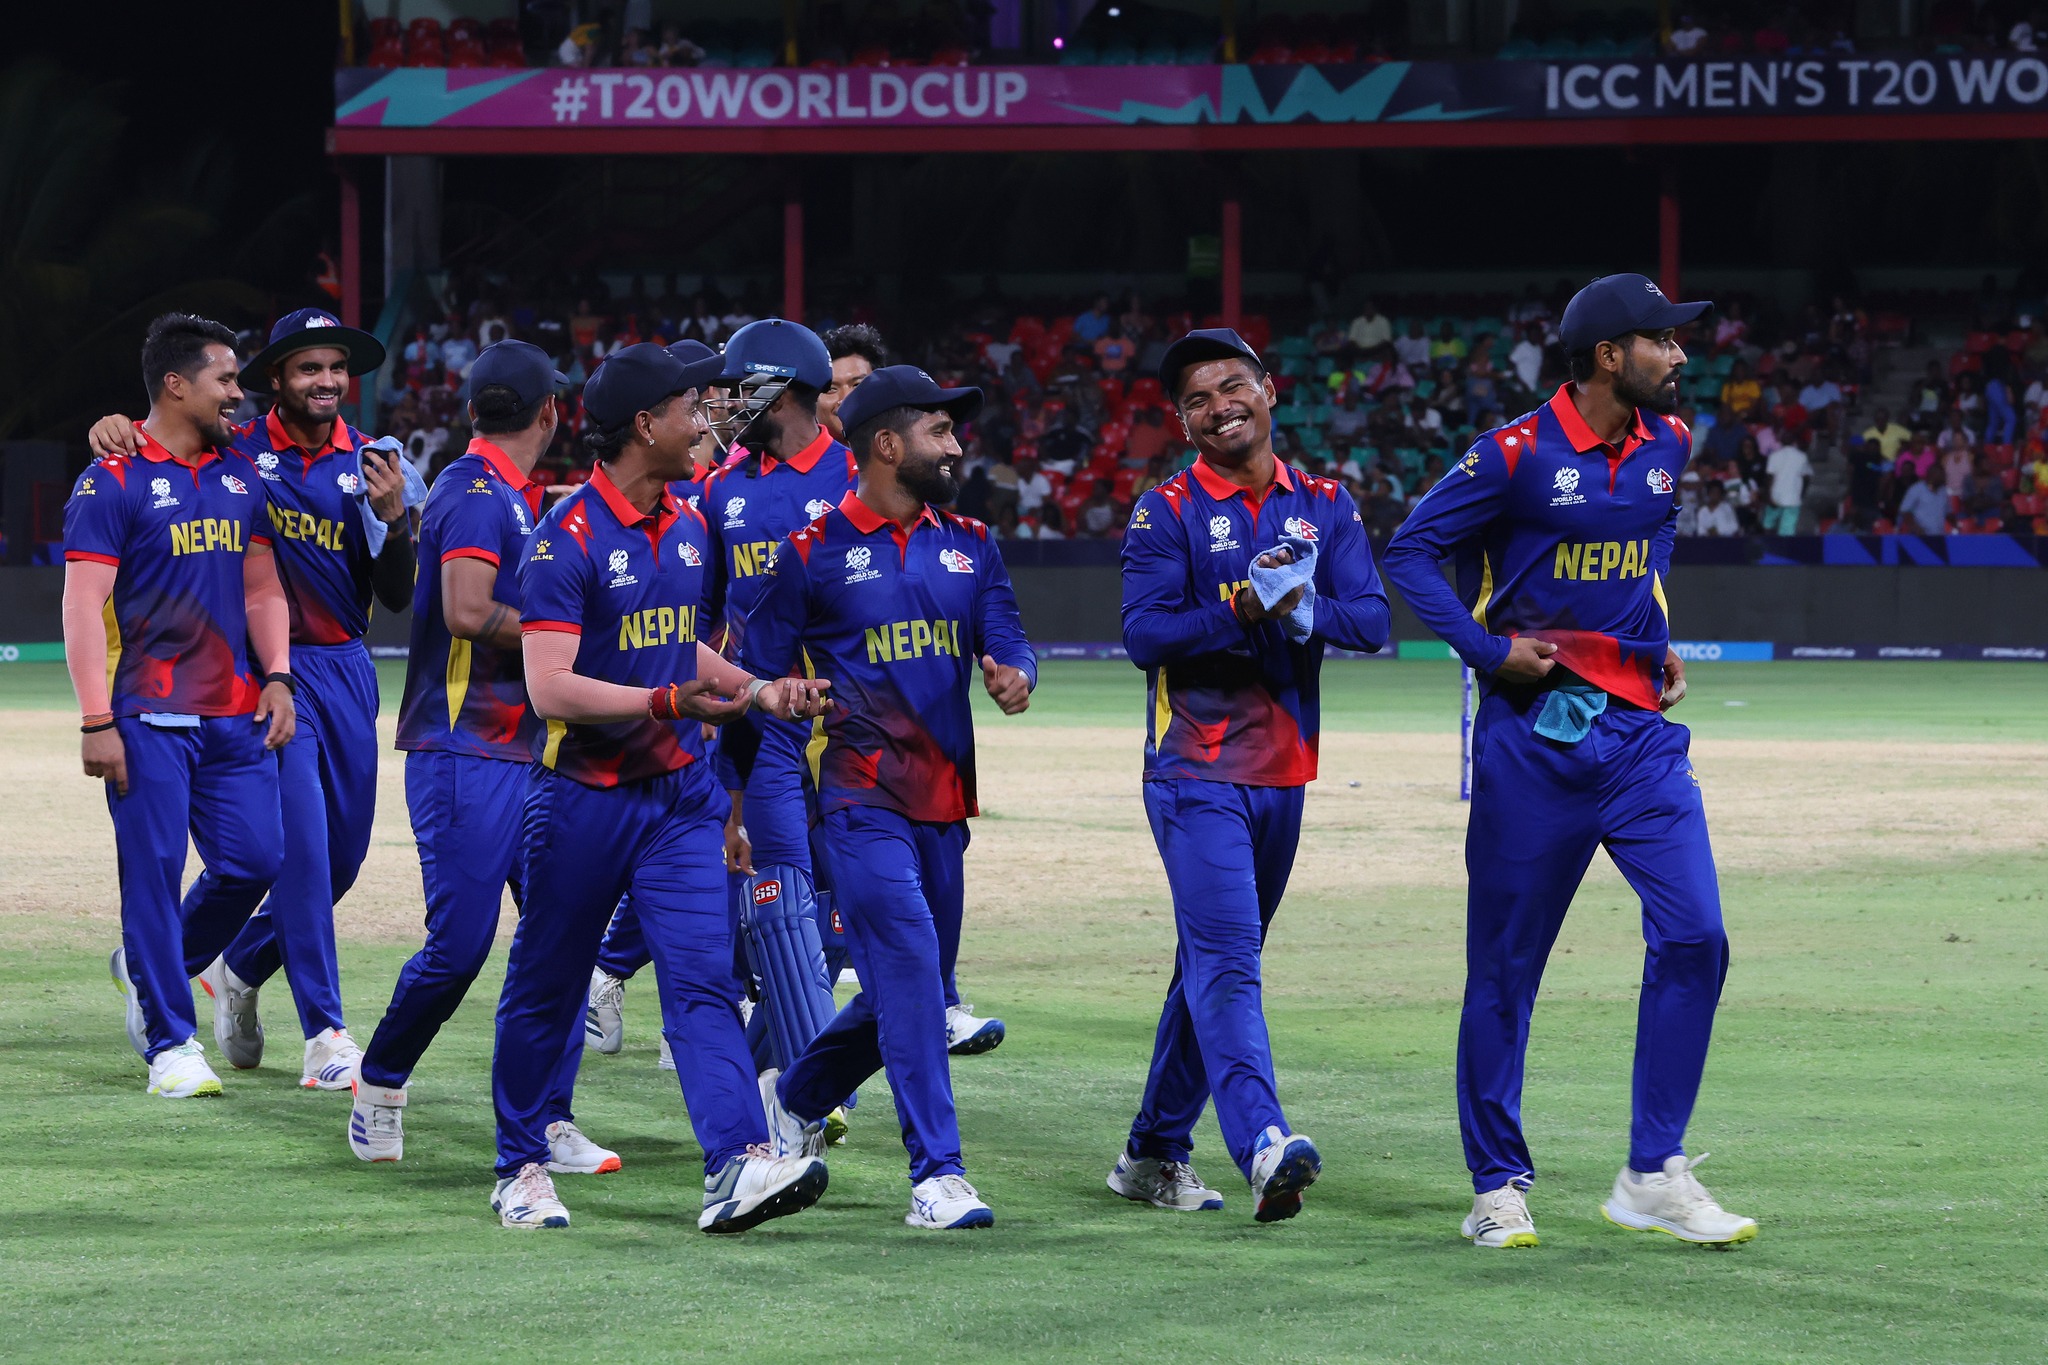 Nepal’s Super 8 hopes dashed in agonizing one-run defeat to South Africa